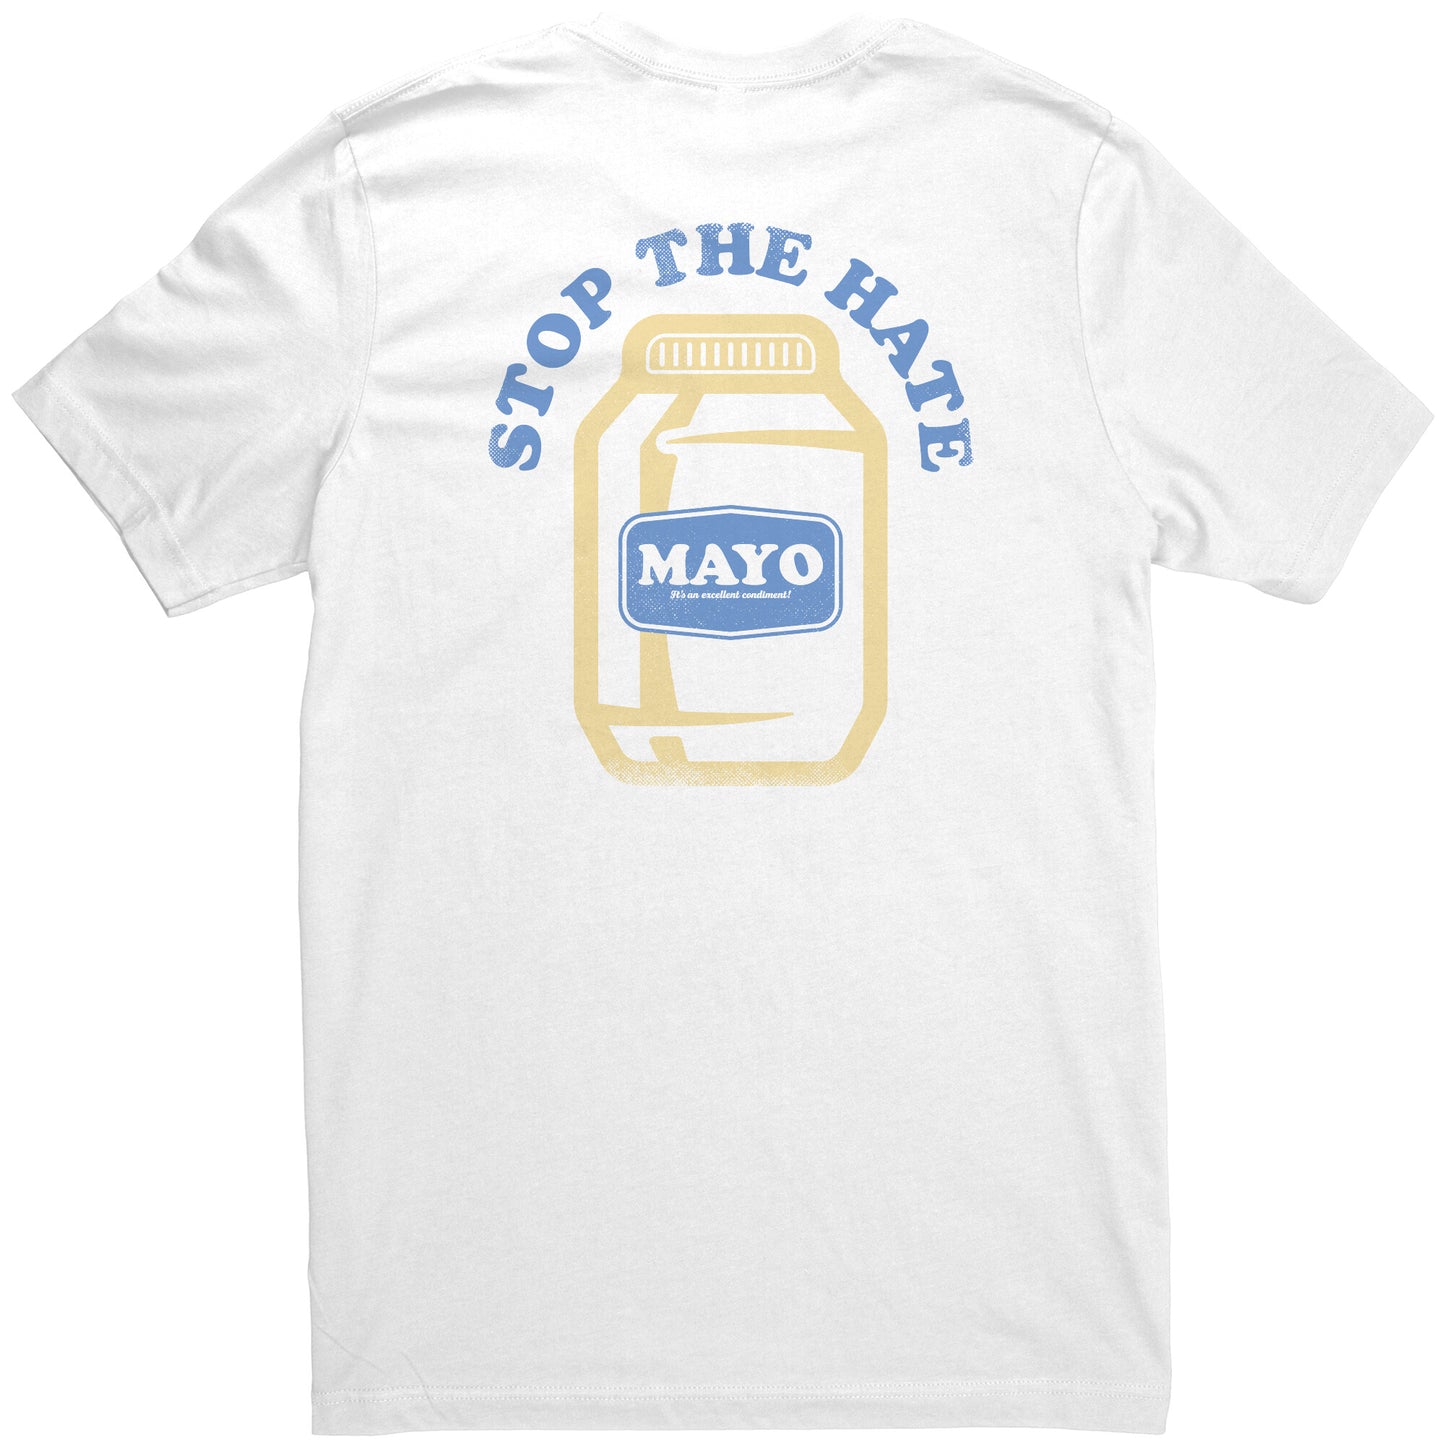 Stop the Hate Mayo Shirt